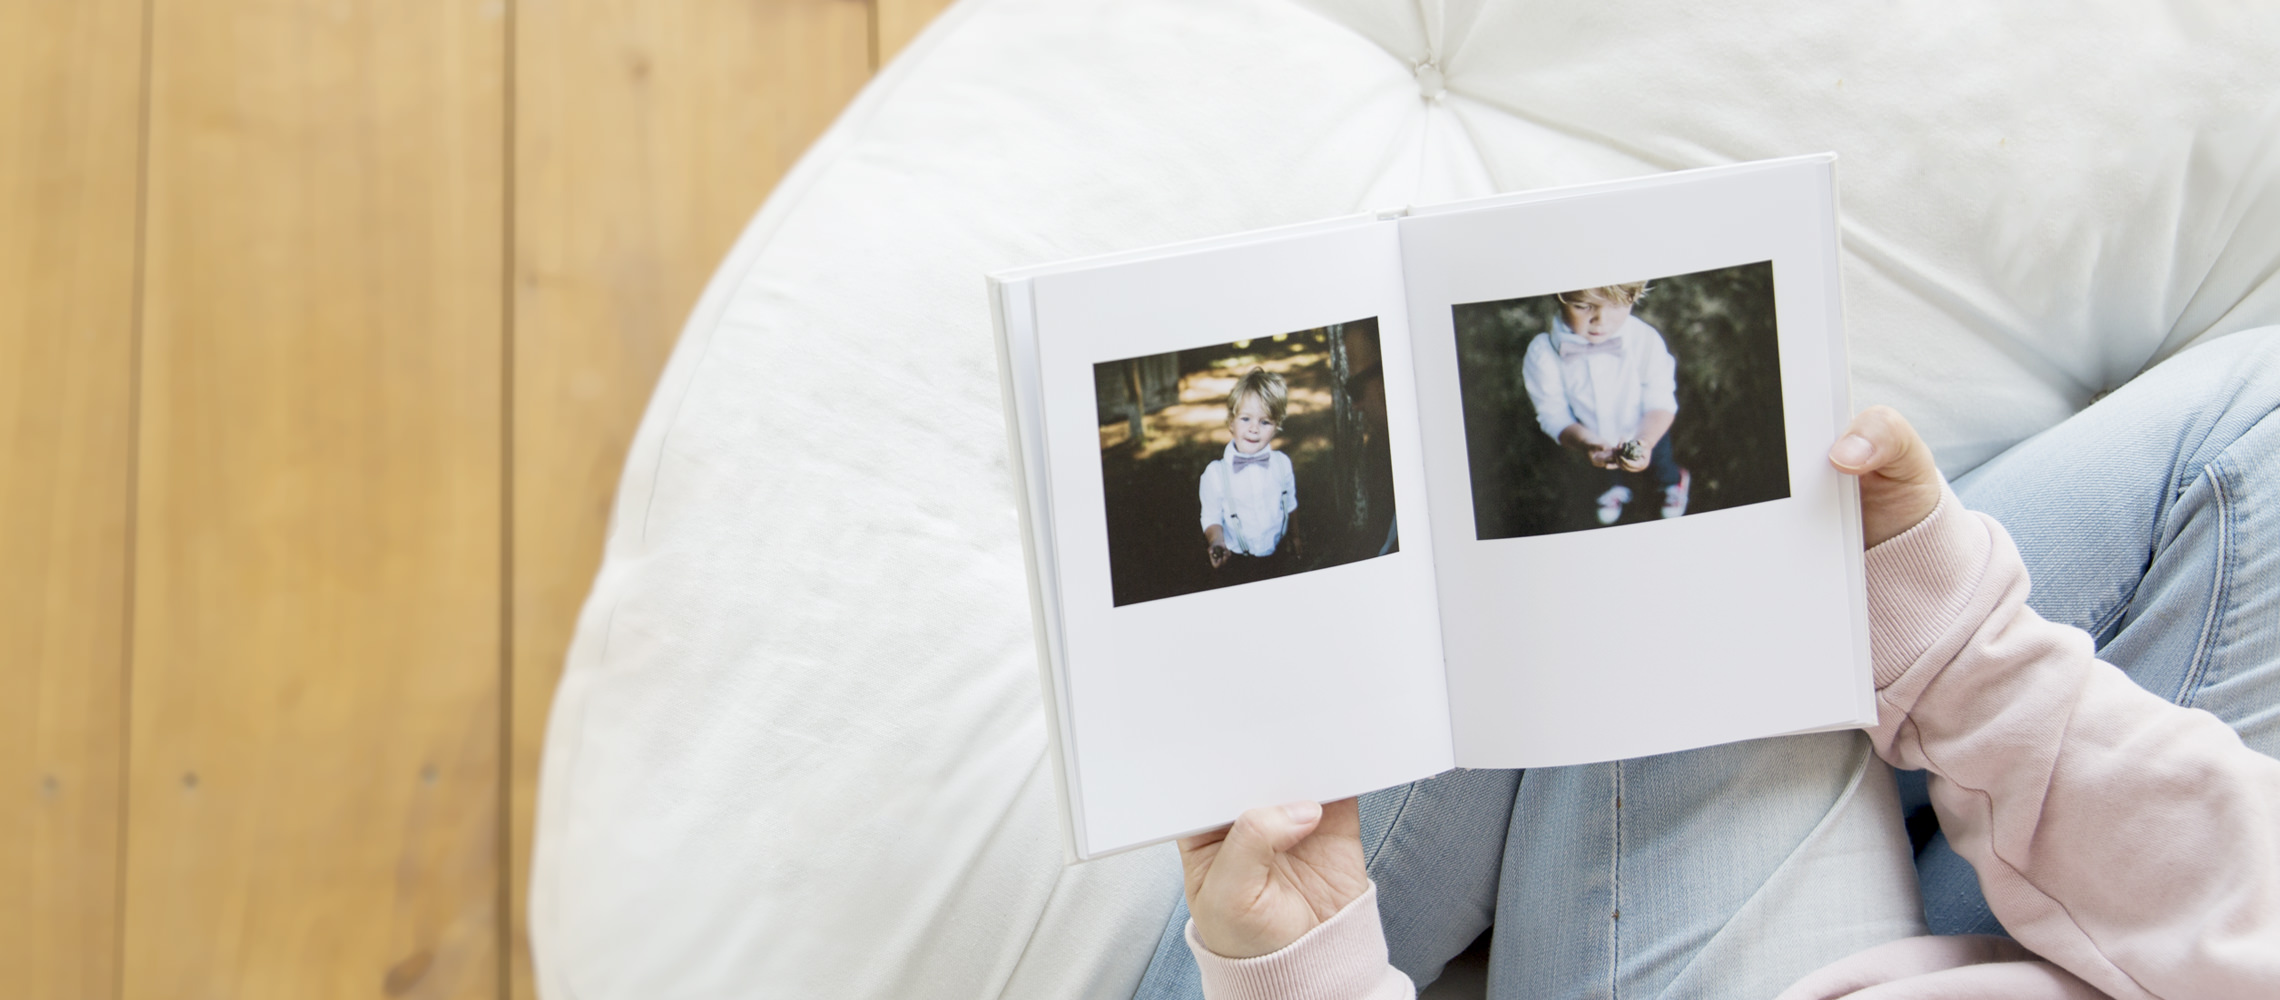 Female looking at portrait photo book with images of a young boy.